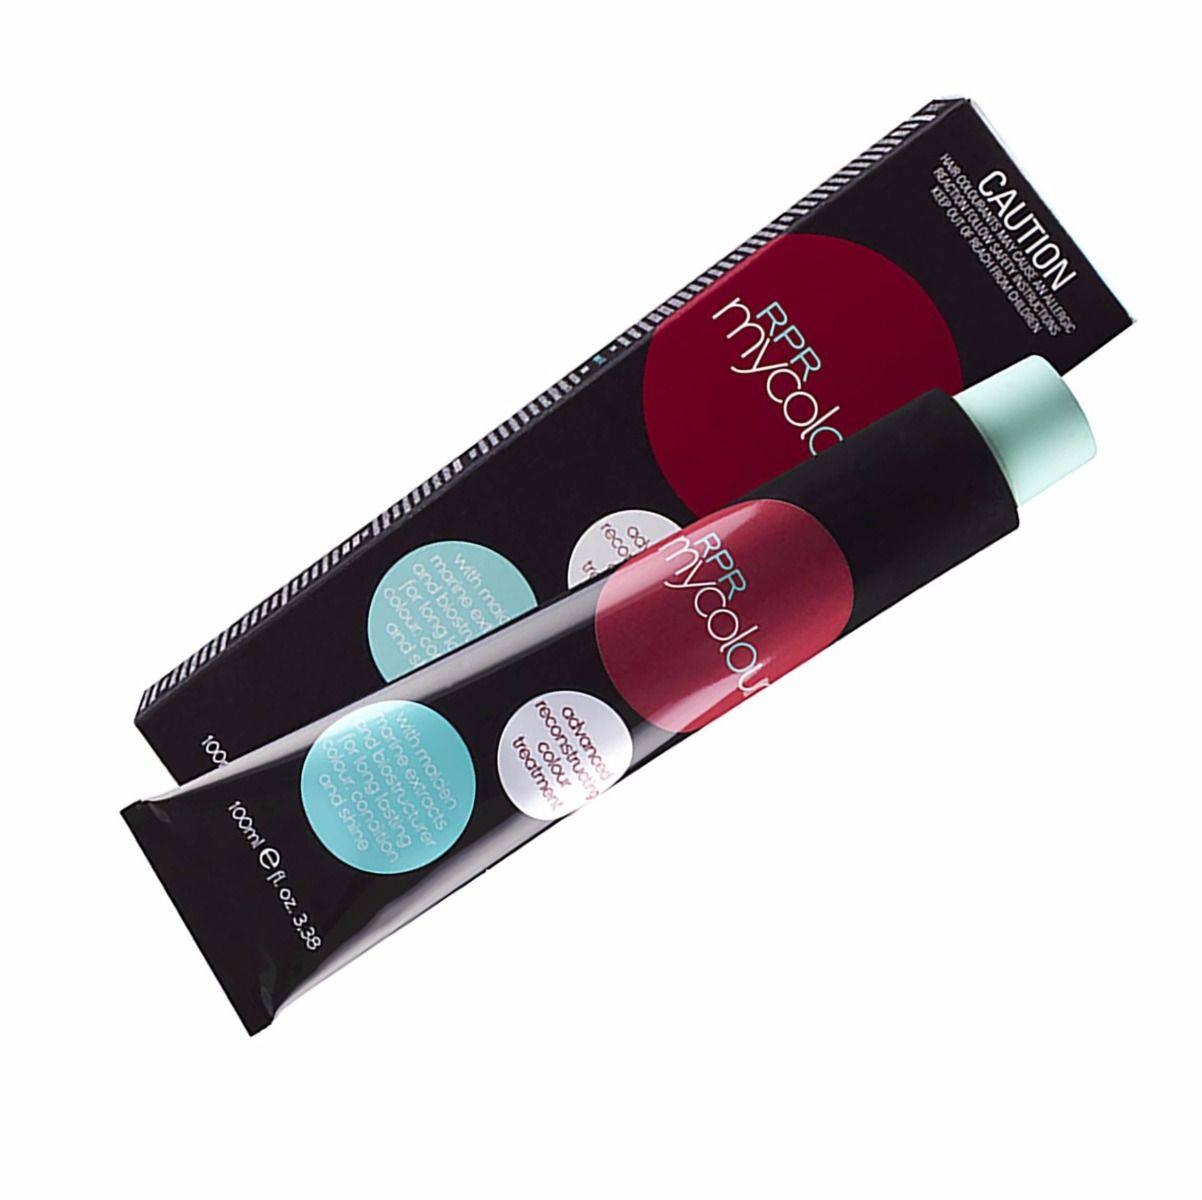 RPR My Colour 5.23 Level 5 Violet Gold 100g tube Mix 1:1.5 My Colour - On Line Hair Depot